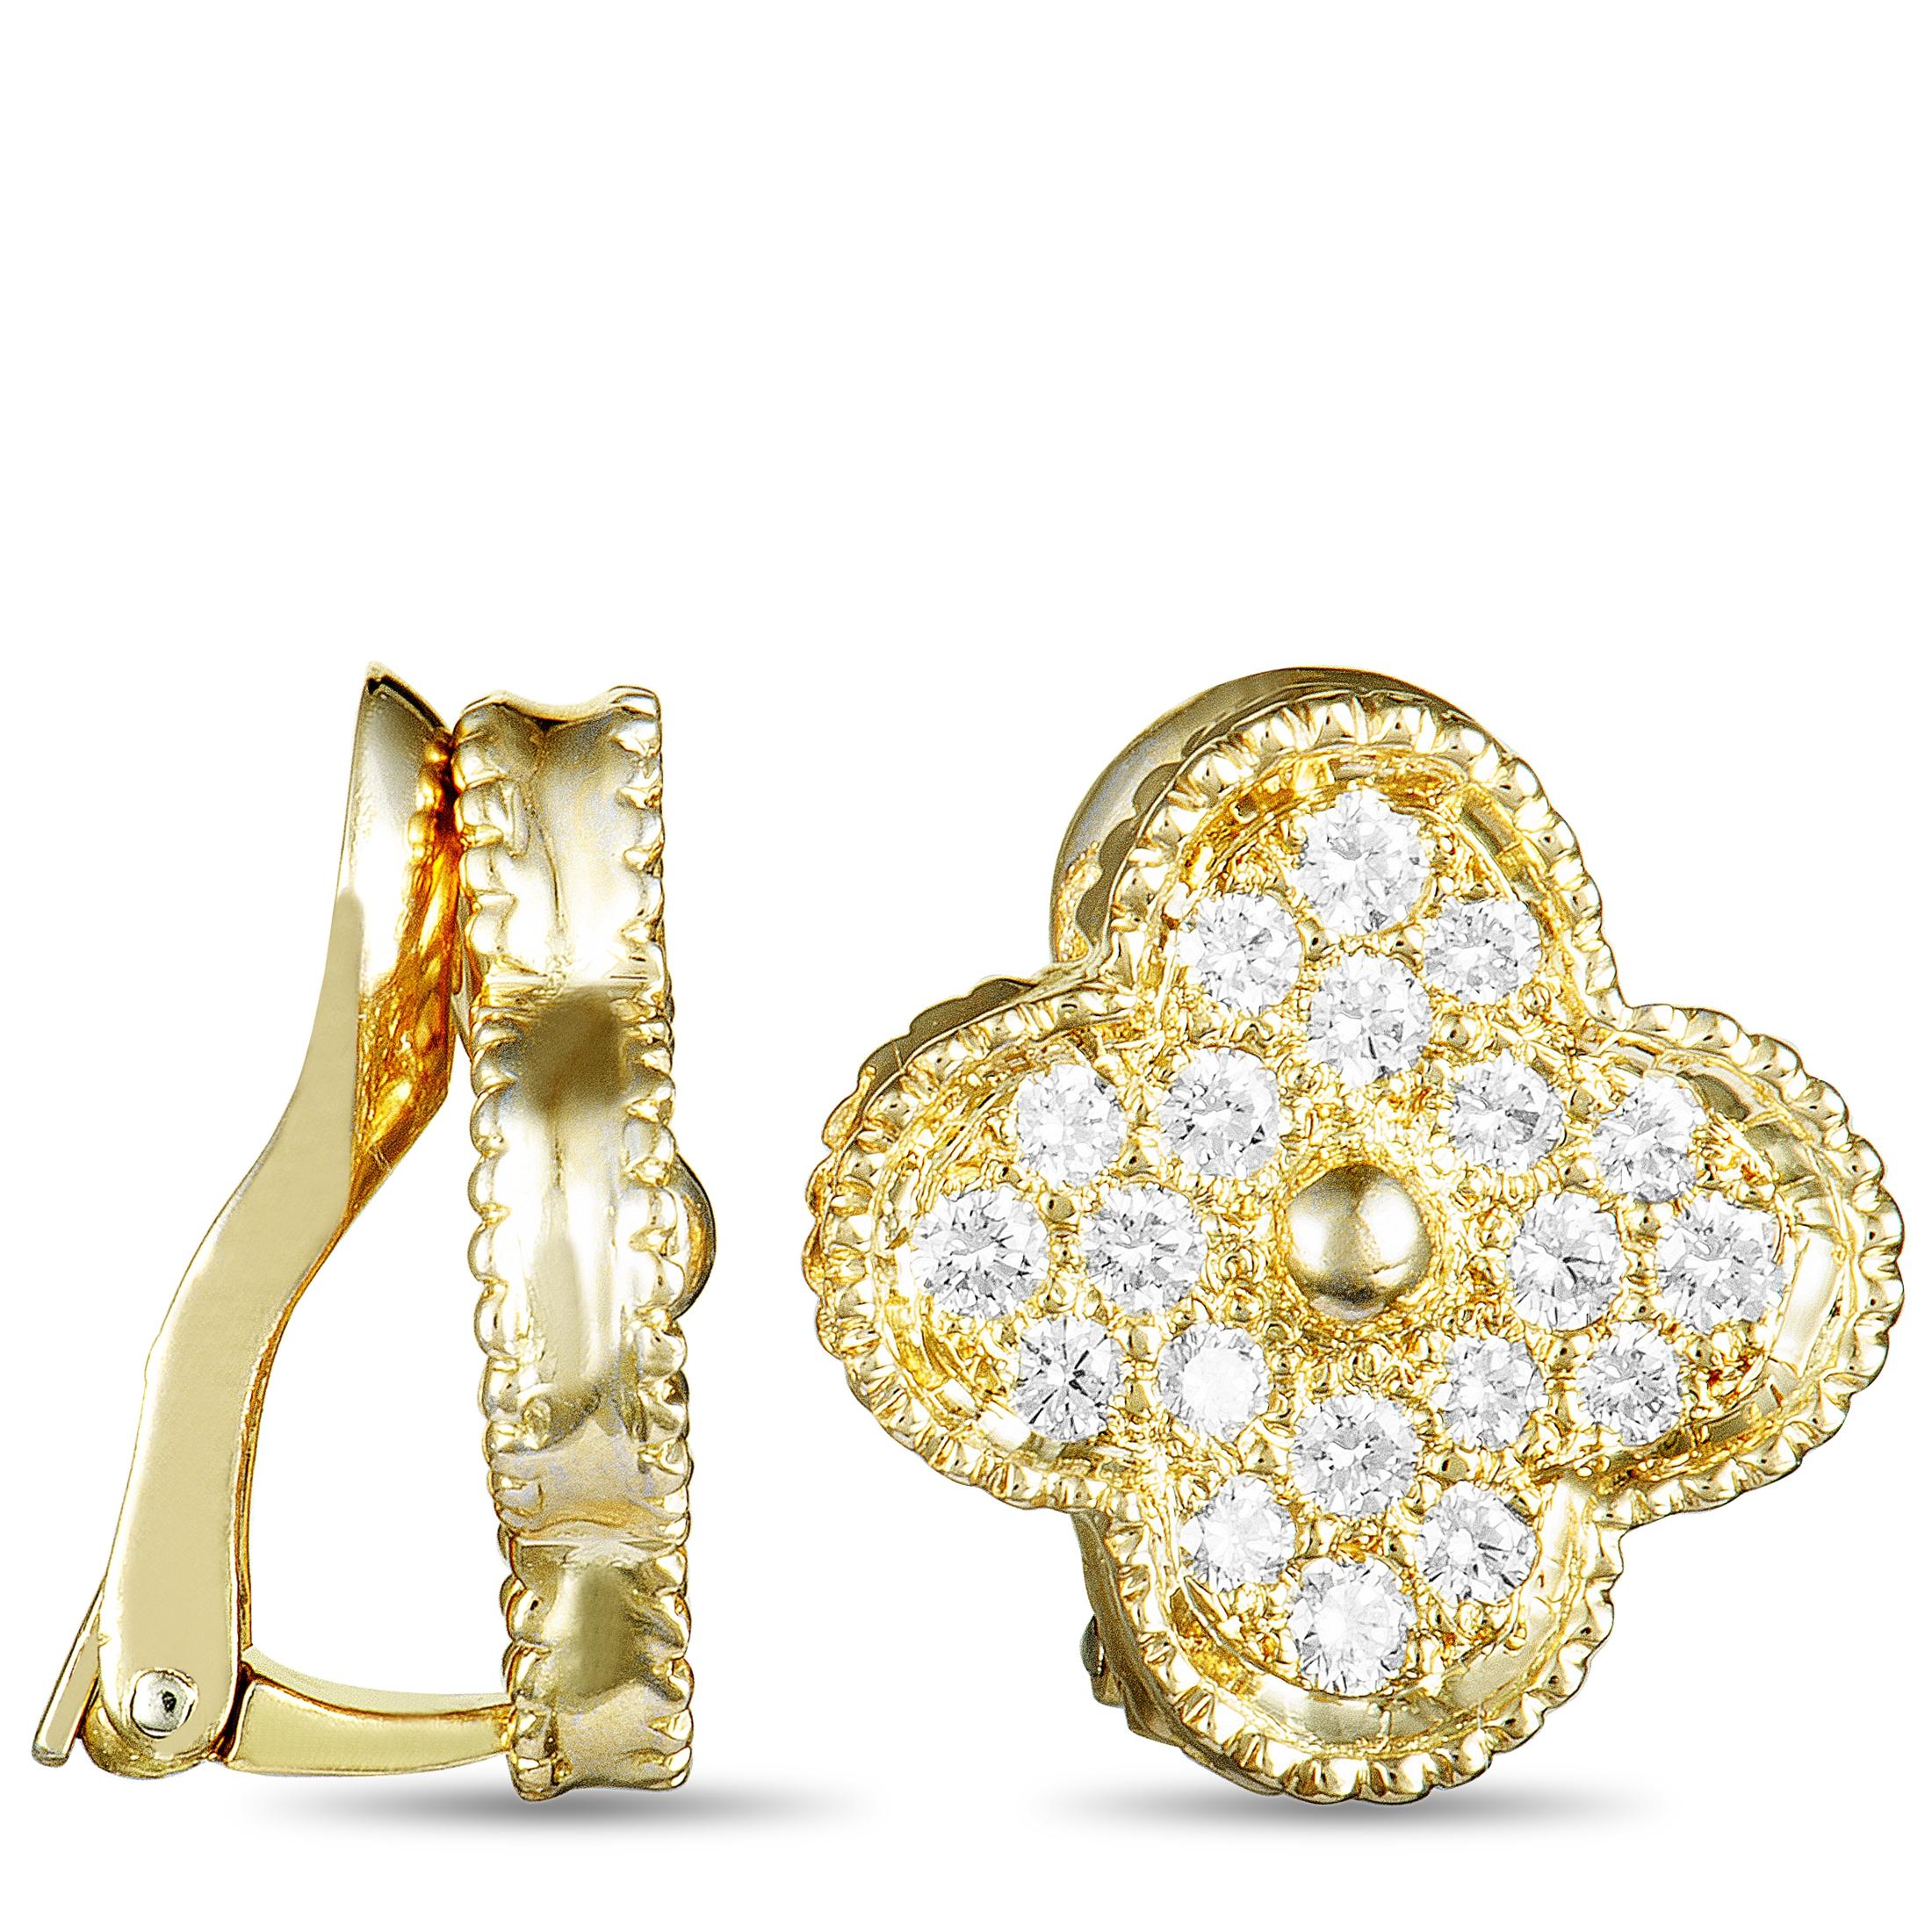 Presented within the iconic “Alhambra” collection, these fascinating Van Cleef & Arpels earrings are a vision of classic prestige and timeless elegance. The pair is wonderfully made of radiant 18K yellow gold and embellished with scintillating